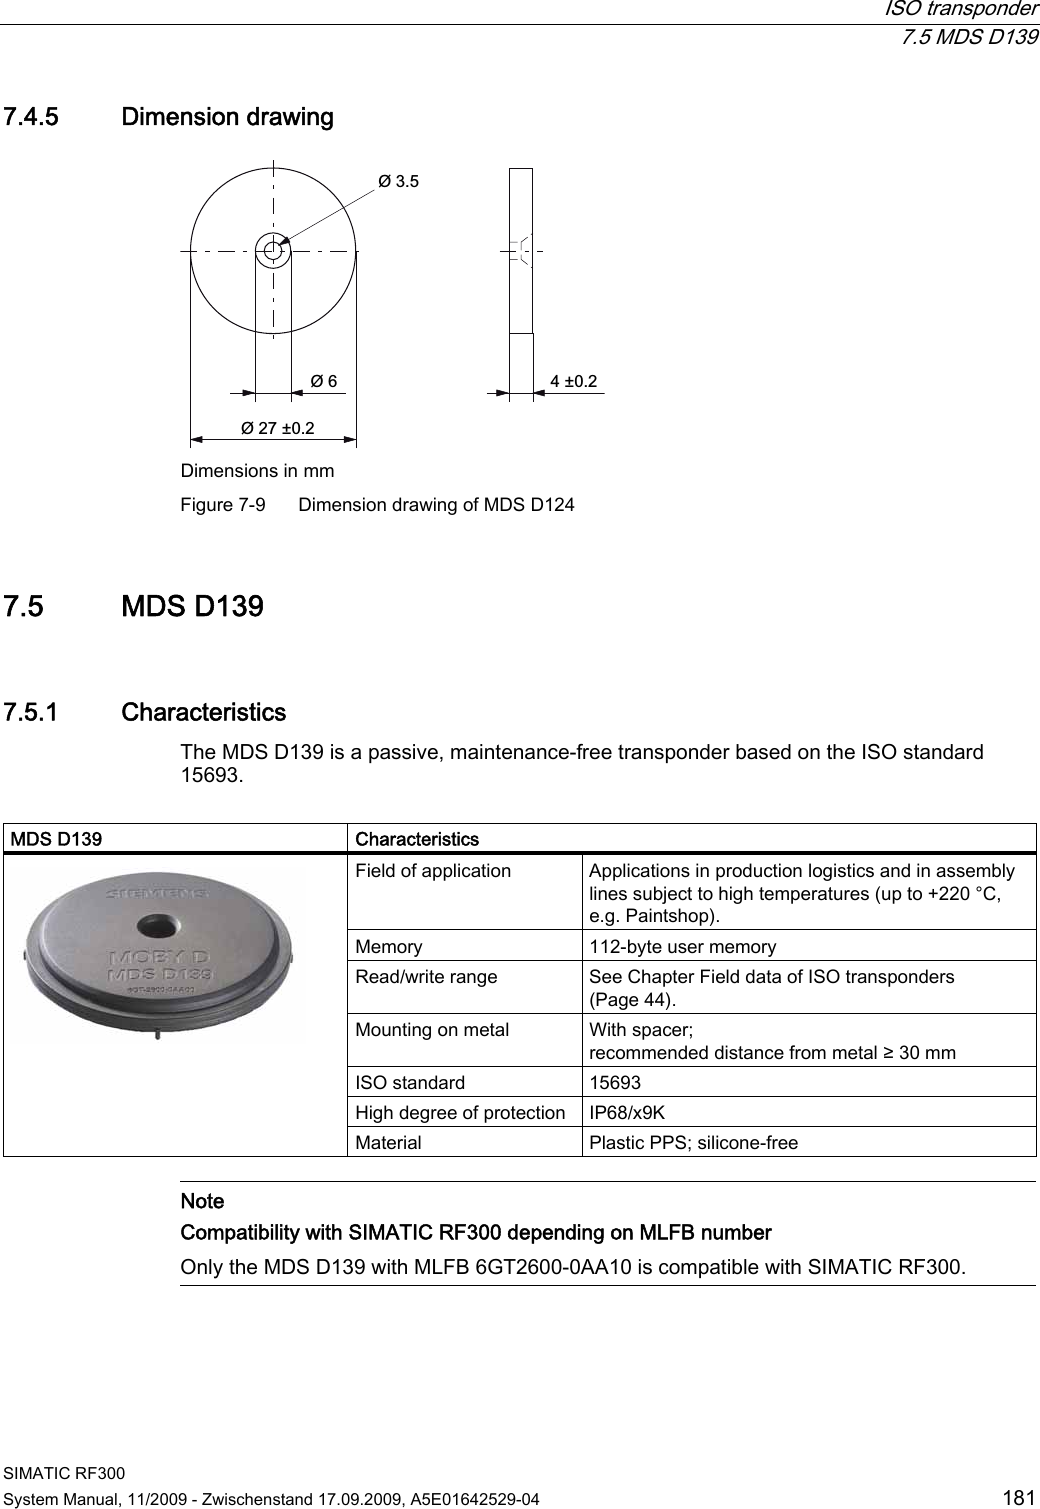  ISO transponder  7.5 MDS D139 SIMATIC RF300 System Manual, 11/2009 - Zwischenstand 17.09.2009, A5E01642529-04  181 7.4.5 Dimension drawing ss Dimensions in mm Figure 7-9  Dimension drawing of MDS D124 7.5 MDS D139 7.5.1 Characteristics The MDS D139 is a passive, maintenance-free transponder based on the ISO standard 15693.  MDS D139  Characteristics Field of application  Applications in production logistics and in assembly lines subject to high temperatures (up to +220 °C, e.g. Paintshop). Memory  112-byte user memory Read/write range  See Chapter Field data of ISO transponders (Page 44). Mounting on metal  With spacer;  recommended distance from metal ≥ 30 mm ISO standard  15693 High degree of protection  IP68/x9K  Material  Plastic PPS; silicone-free    Note Compatibility with SIMATIC RF300 depending on MLFB number Only the MDS D139 with MLFB 6GT2600-0AA10 is compatible with SIMATIC RF300.  